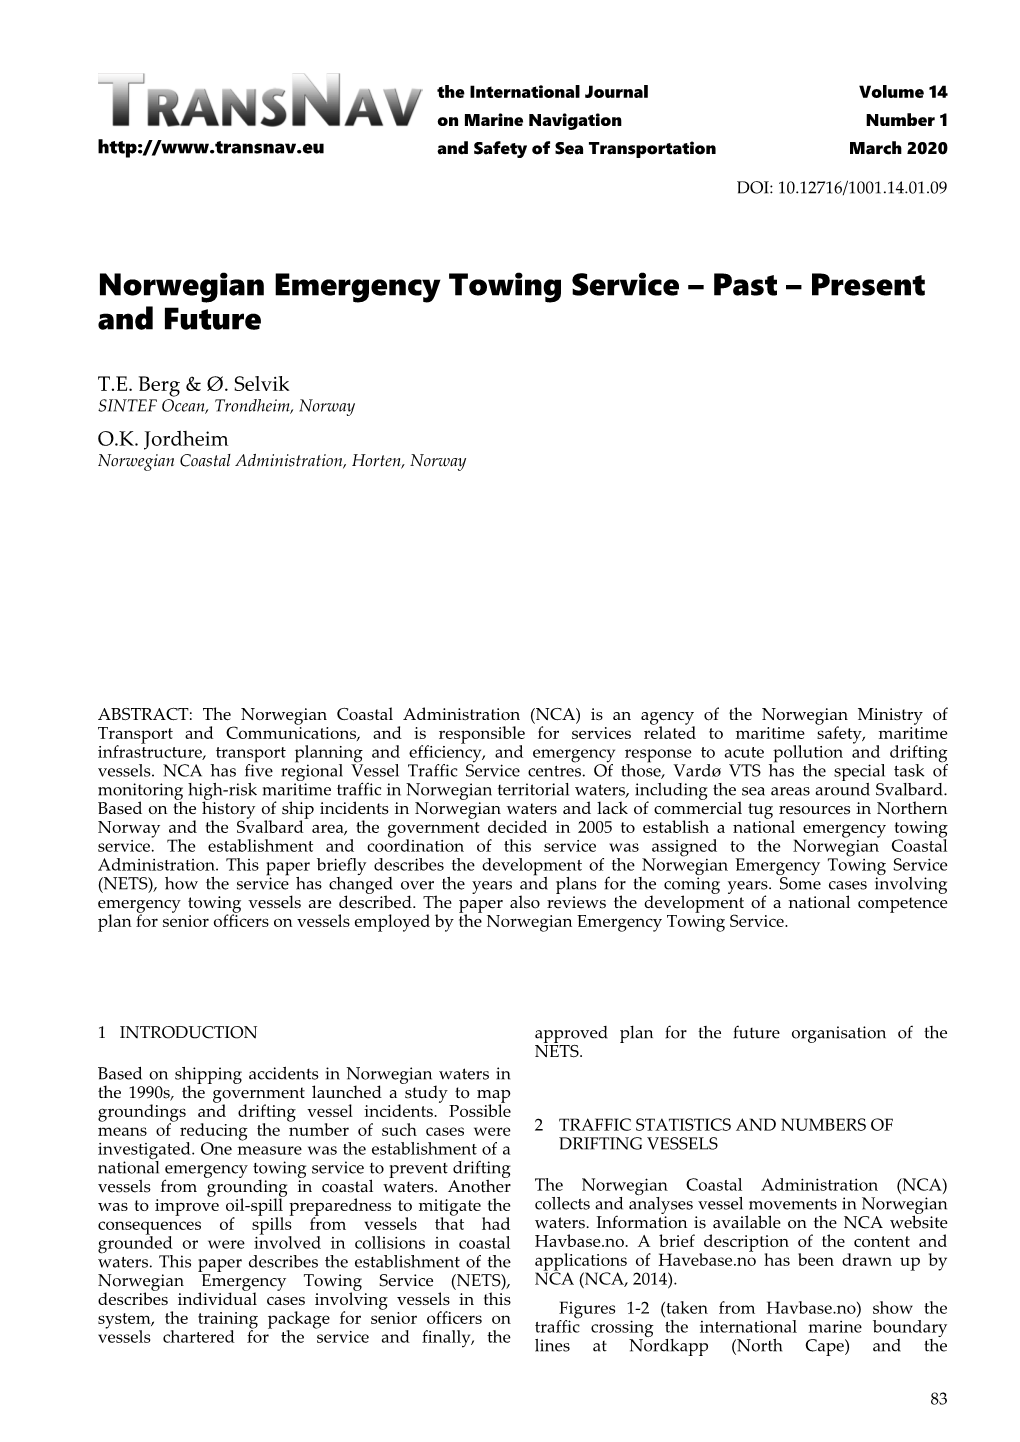 Norwegian Emergency Towing Service – Past – Present and Future